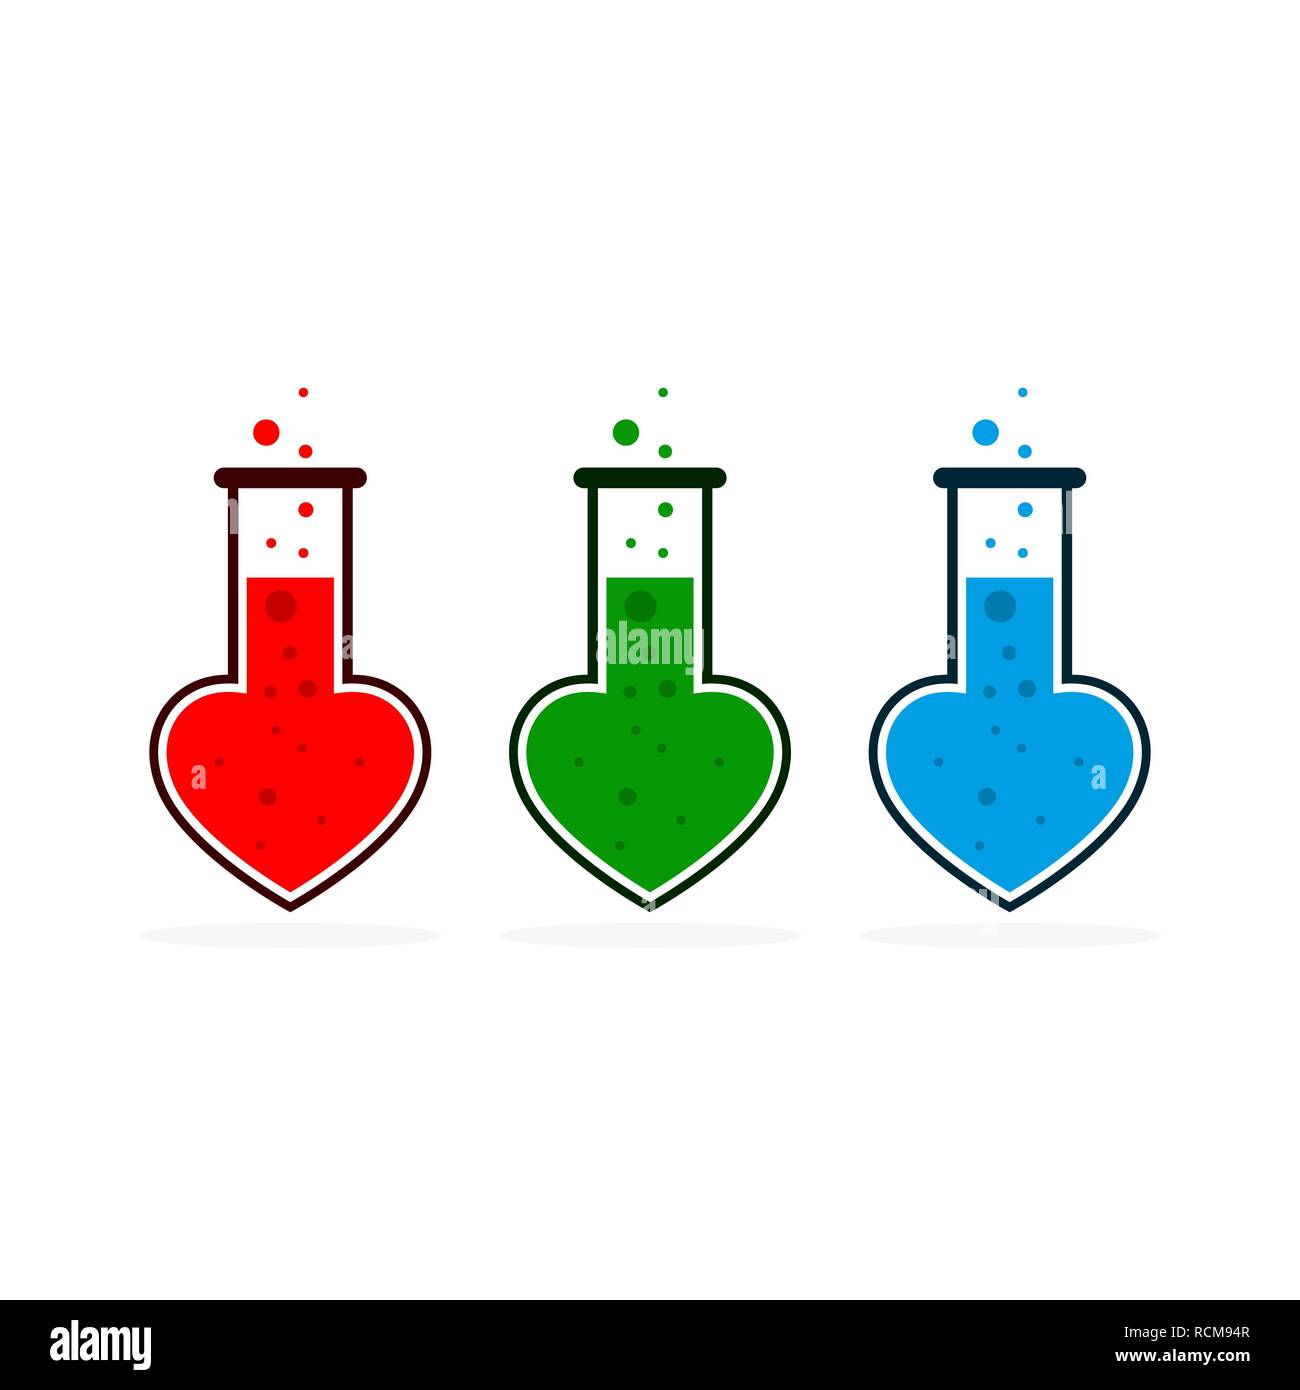 Test tube icon in the shape of the heart. Vector illustration. Concept of Love laboratory in flat design. Stock Vector